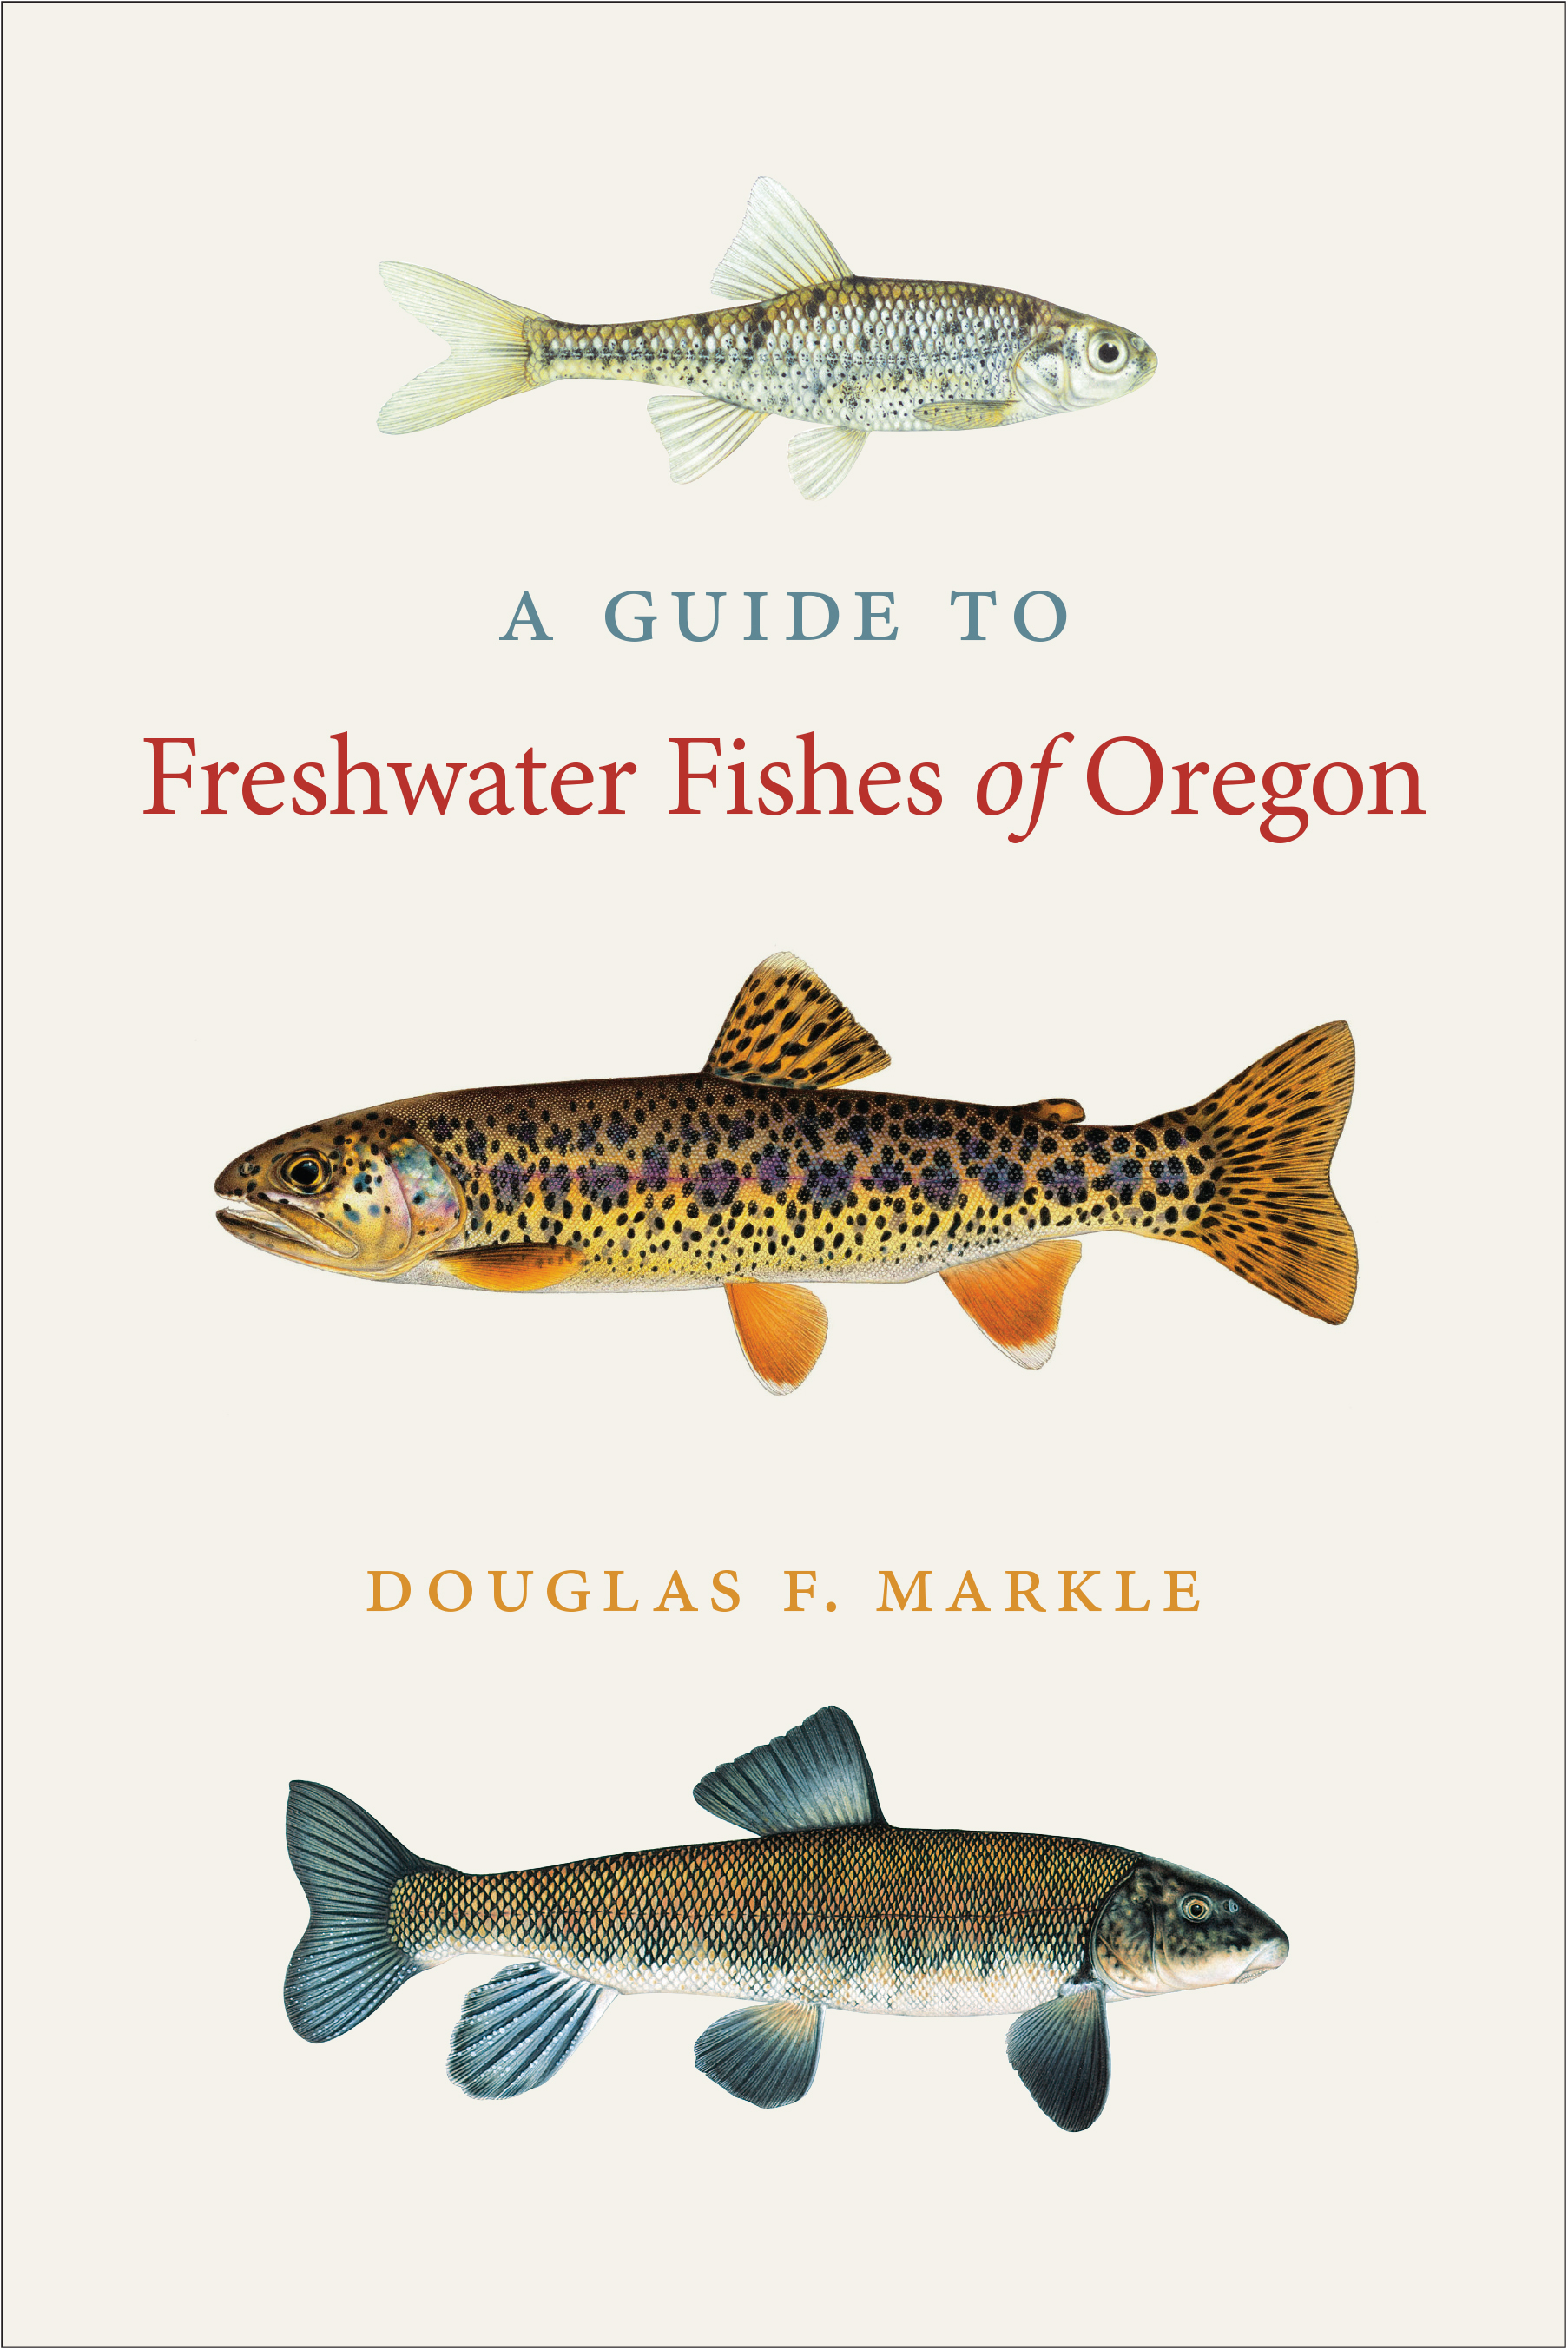 A Guide to Freshwater Fishes of Oregon by Douglas F. Markle